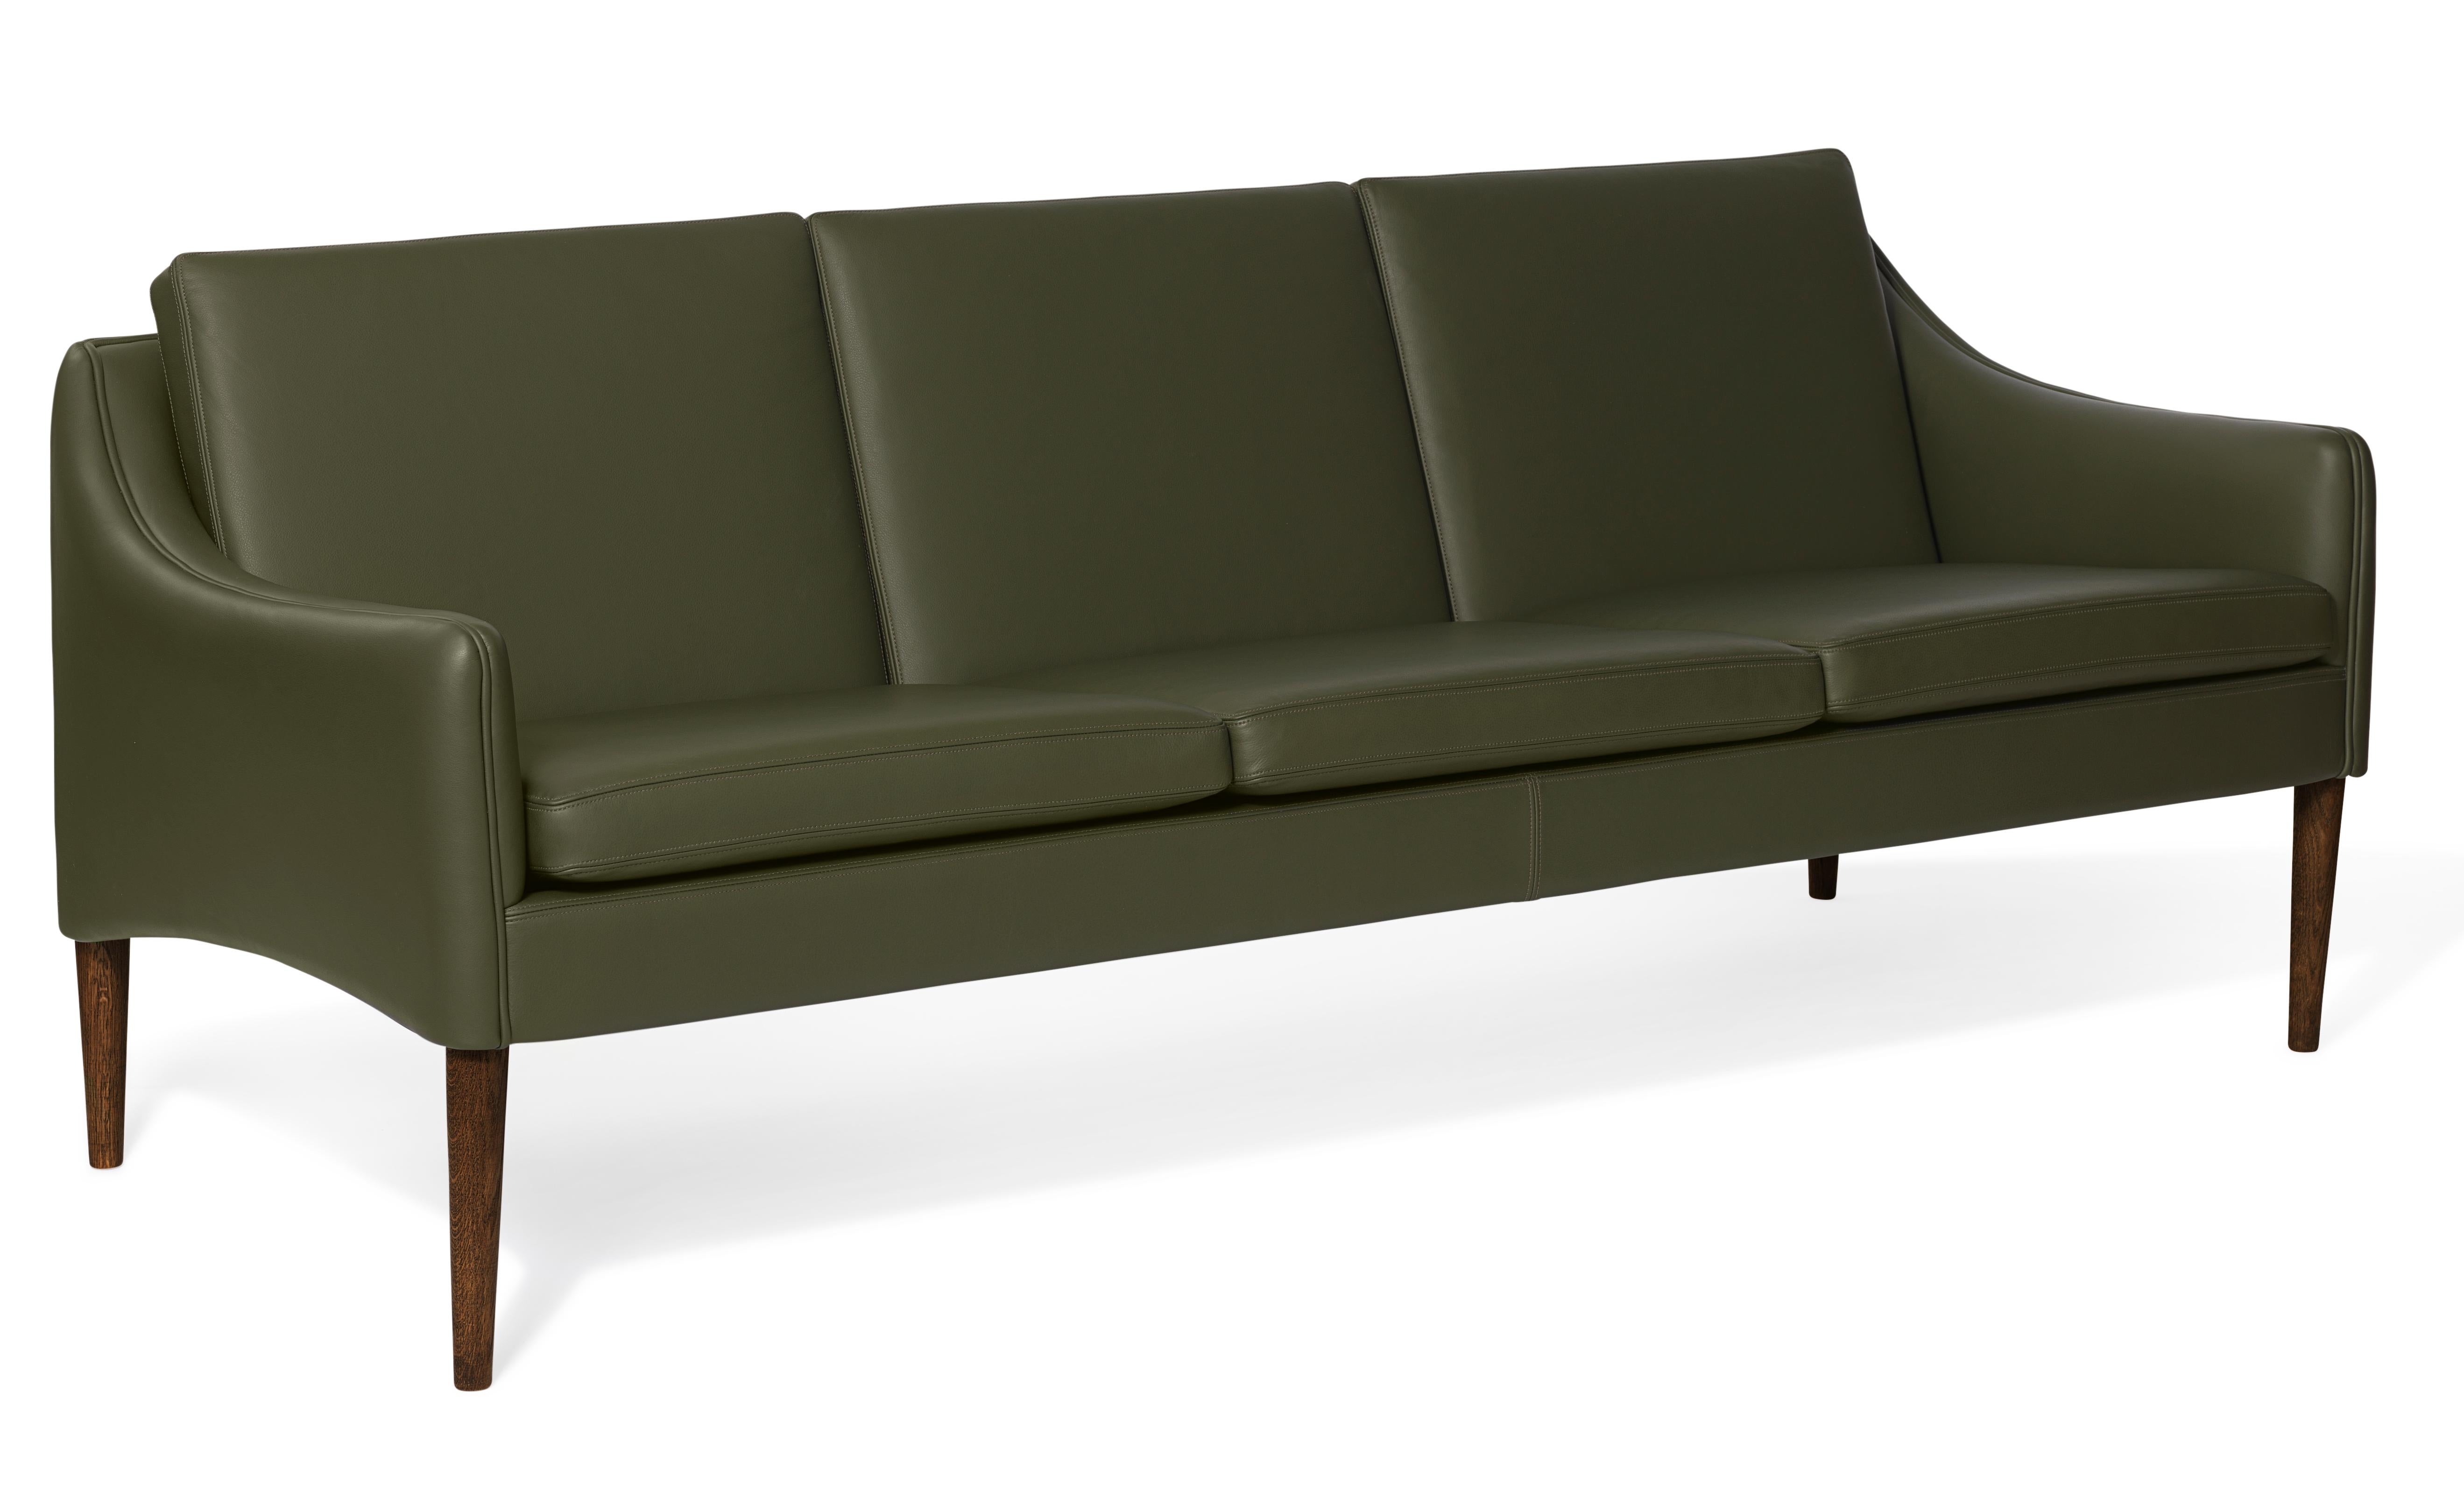 For Sale: Green (Challenger Pickle green) Mr. Olsen 3-Seat Sofa with Walnut Legs, by Hans Olsen from Warm Nordic 2